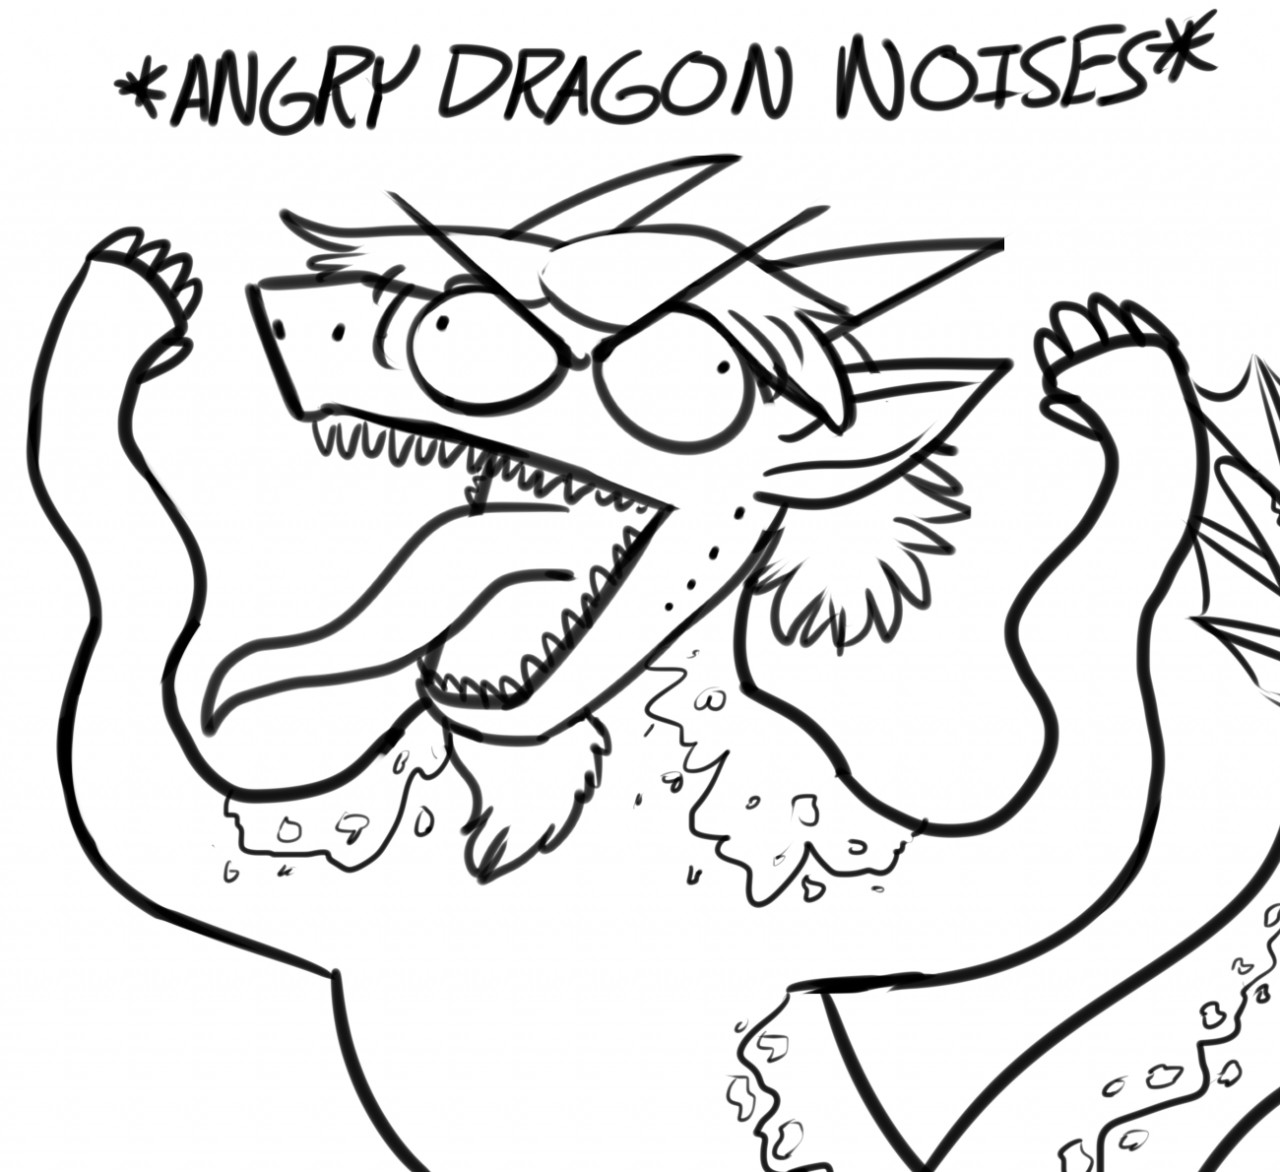 What is an angry dragon